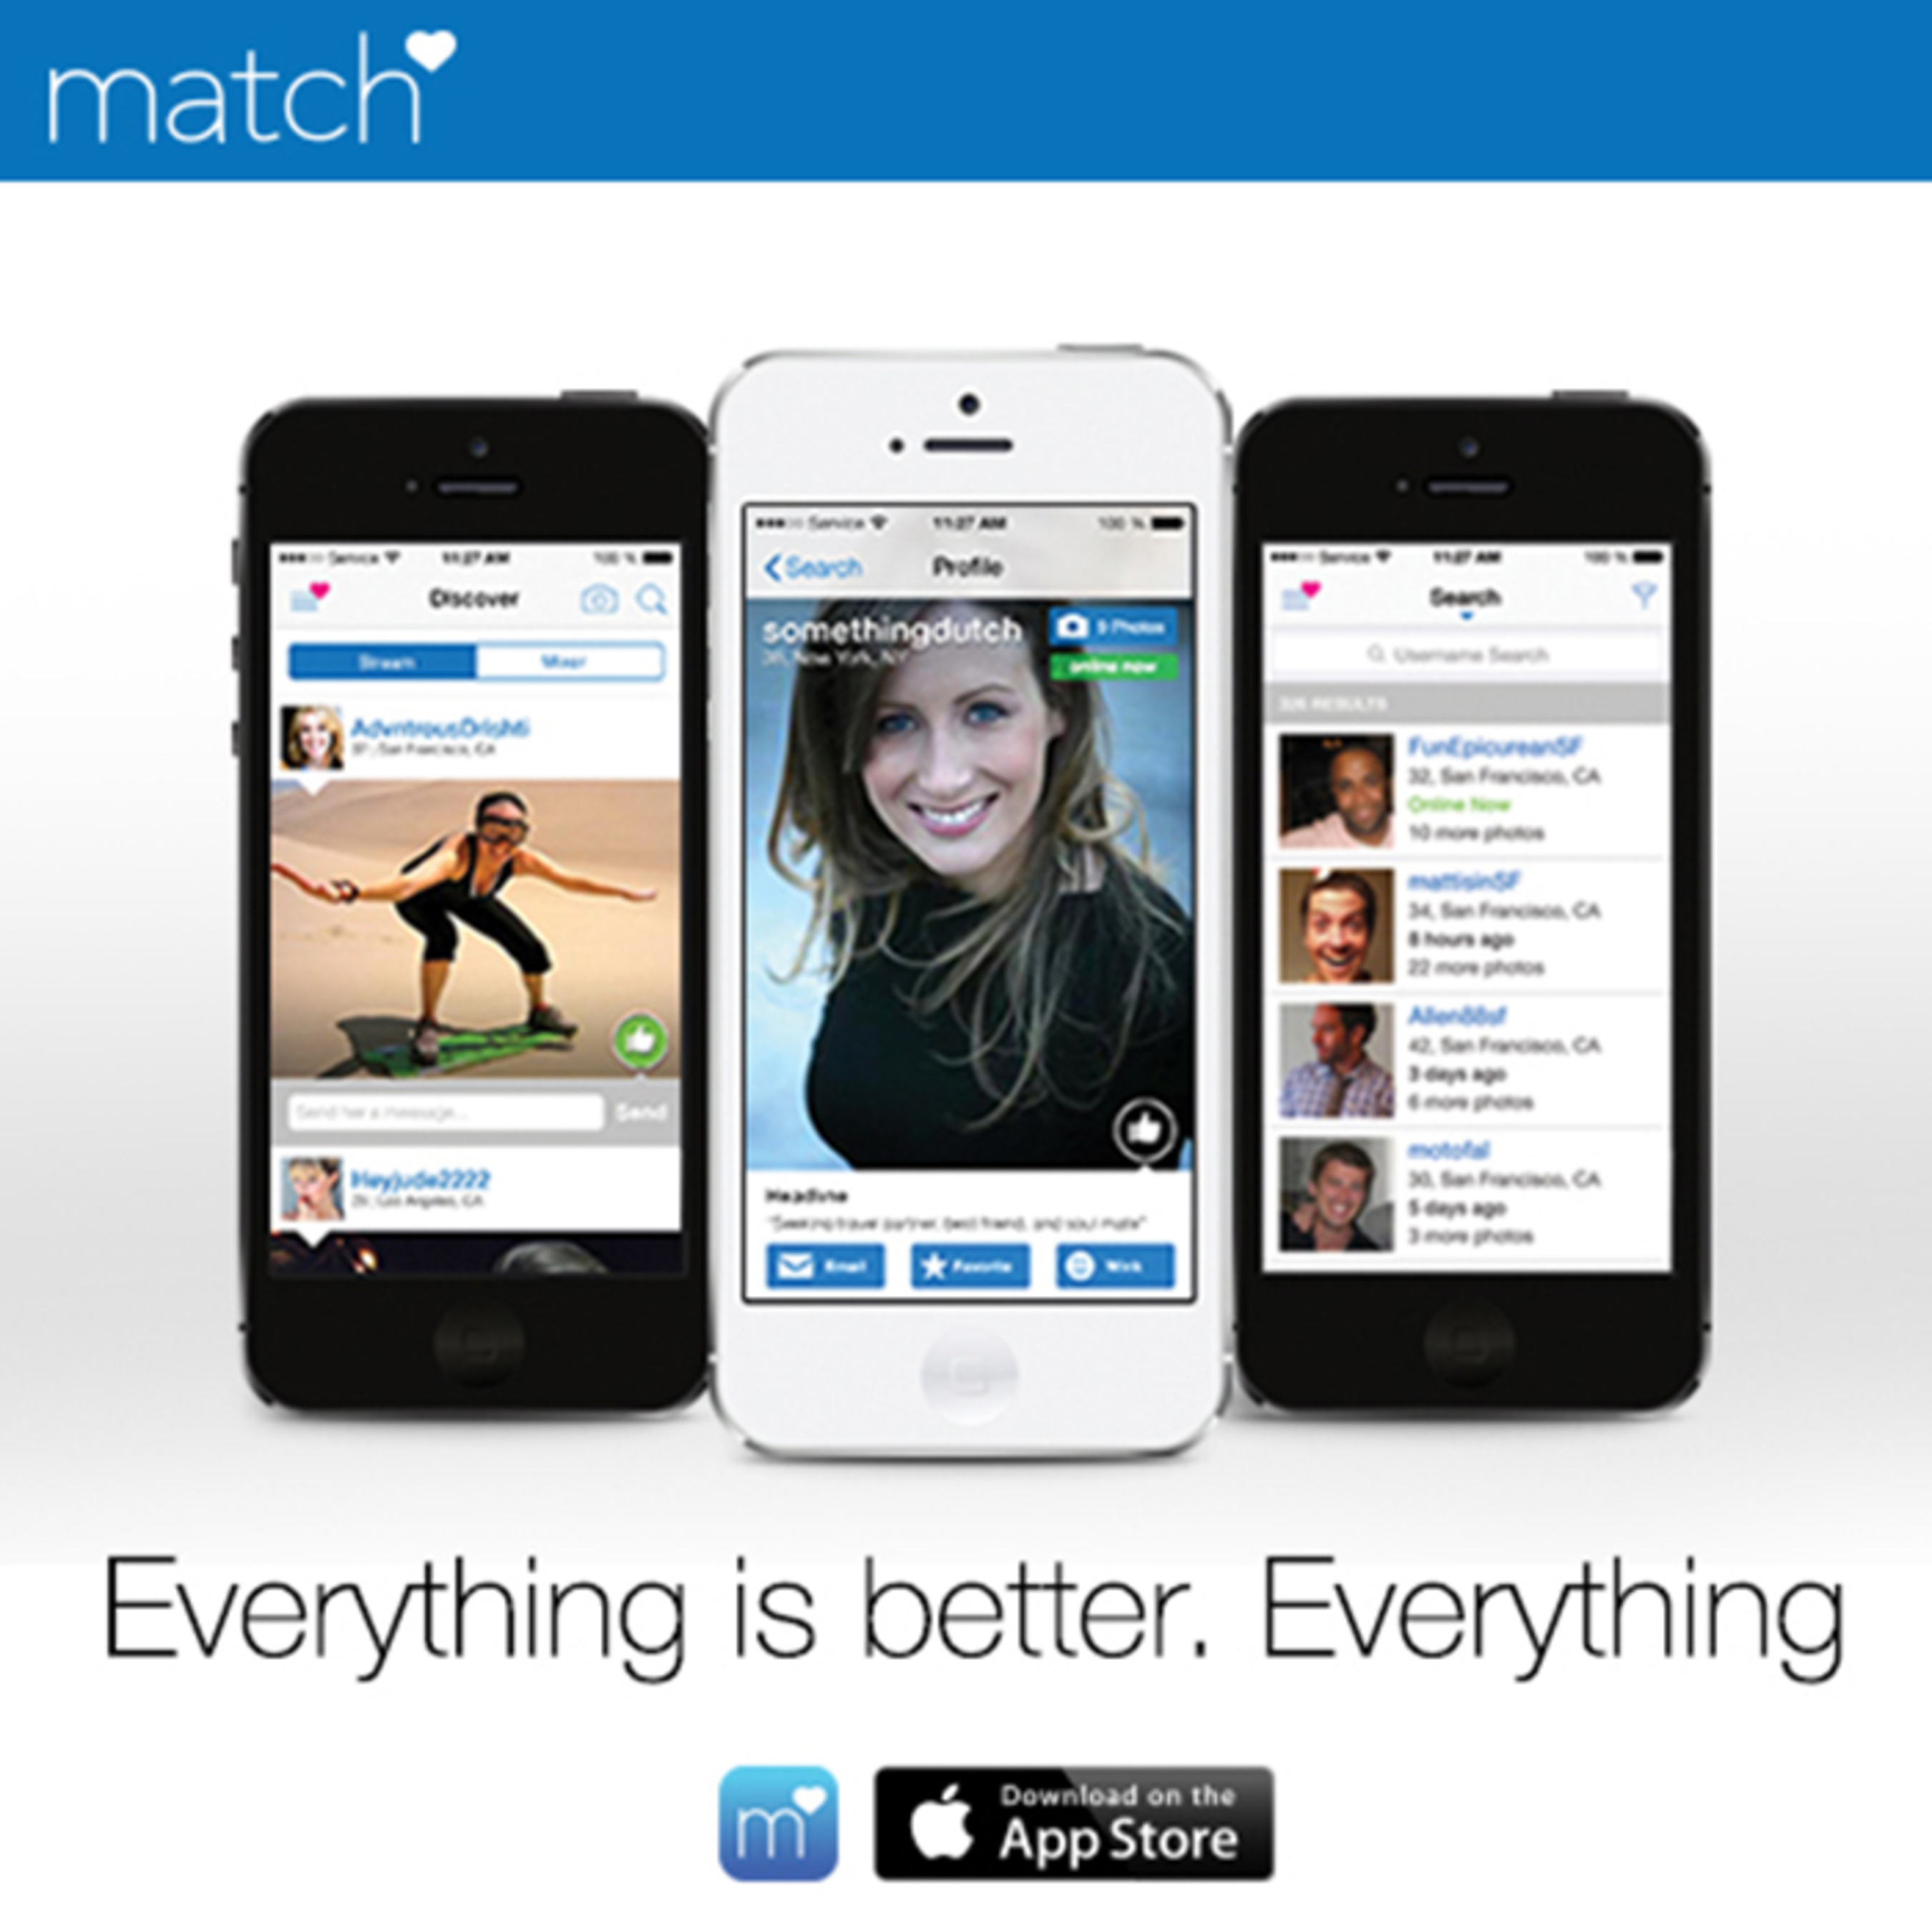 Match launches brand new app for iPhone and iPod Touch (PRNewsFoto/Match.com)